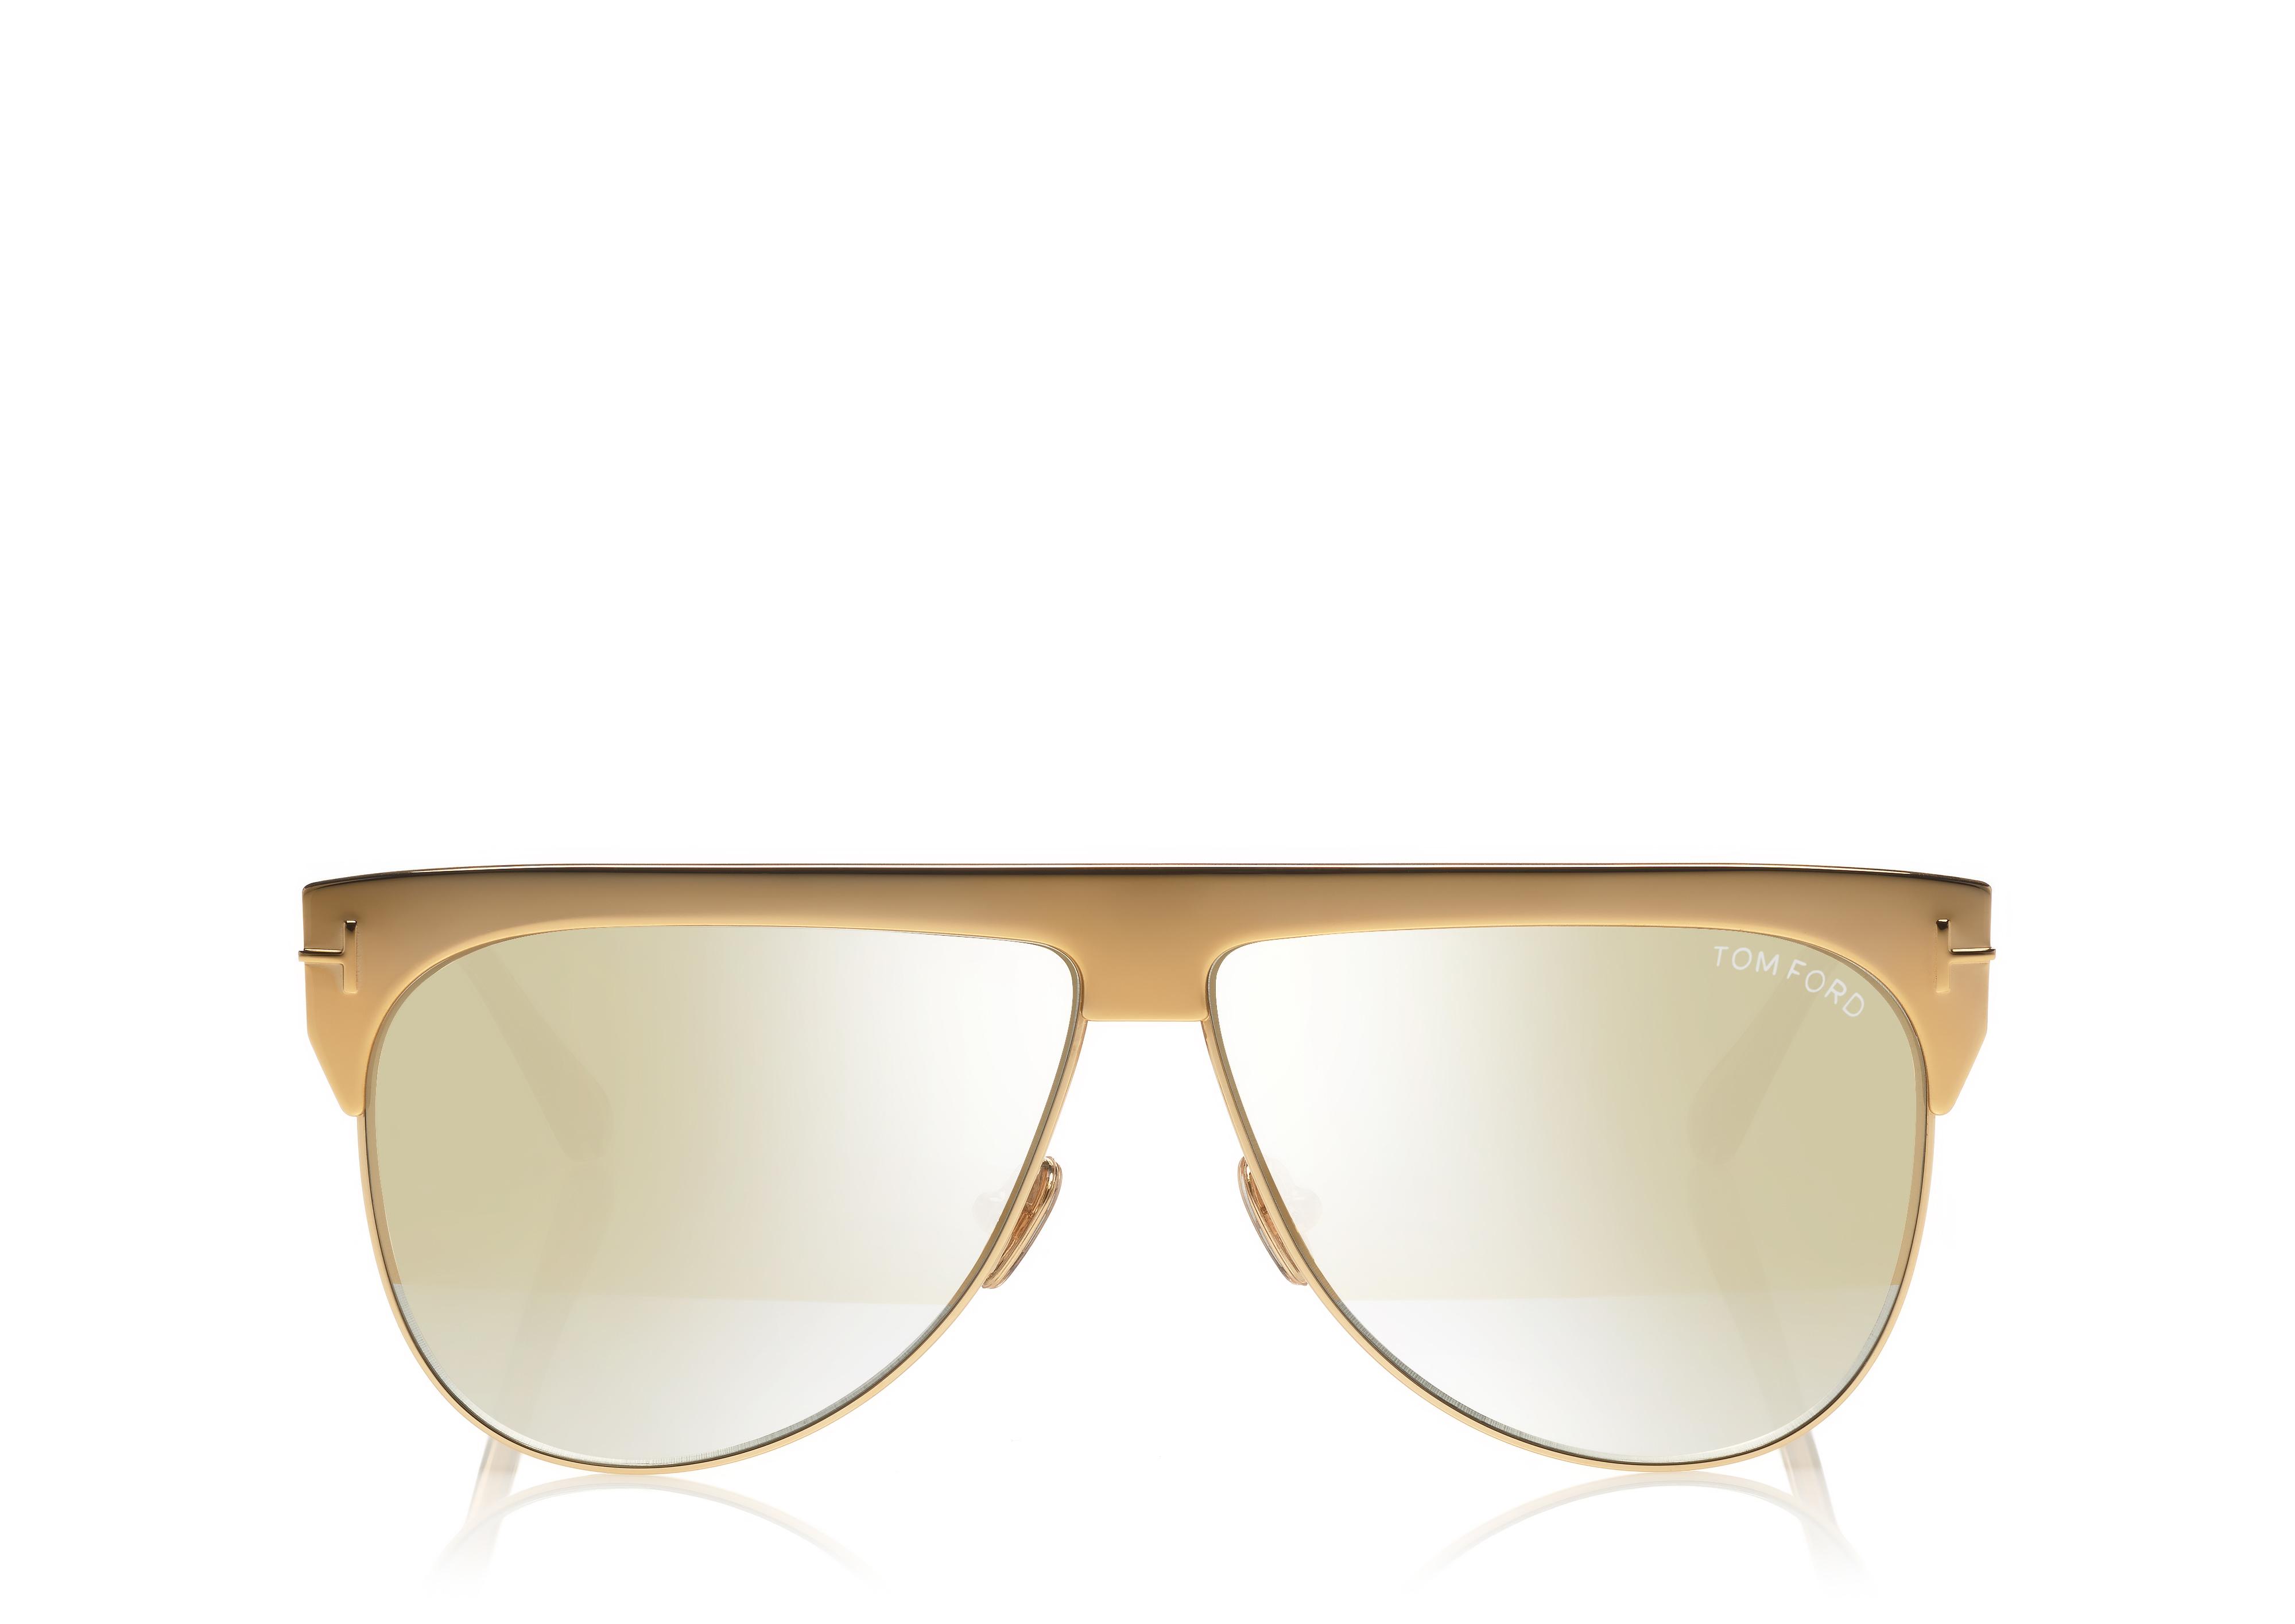 Tom Ford WINTER GOLD PLATED SUNGLASSES 